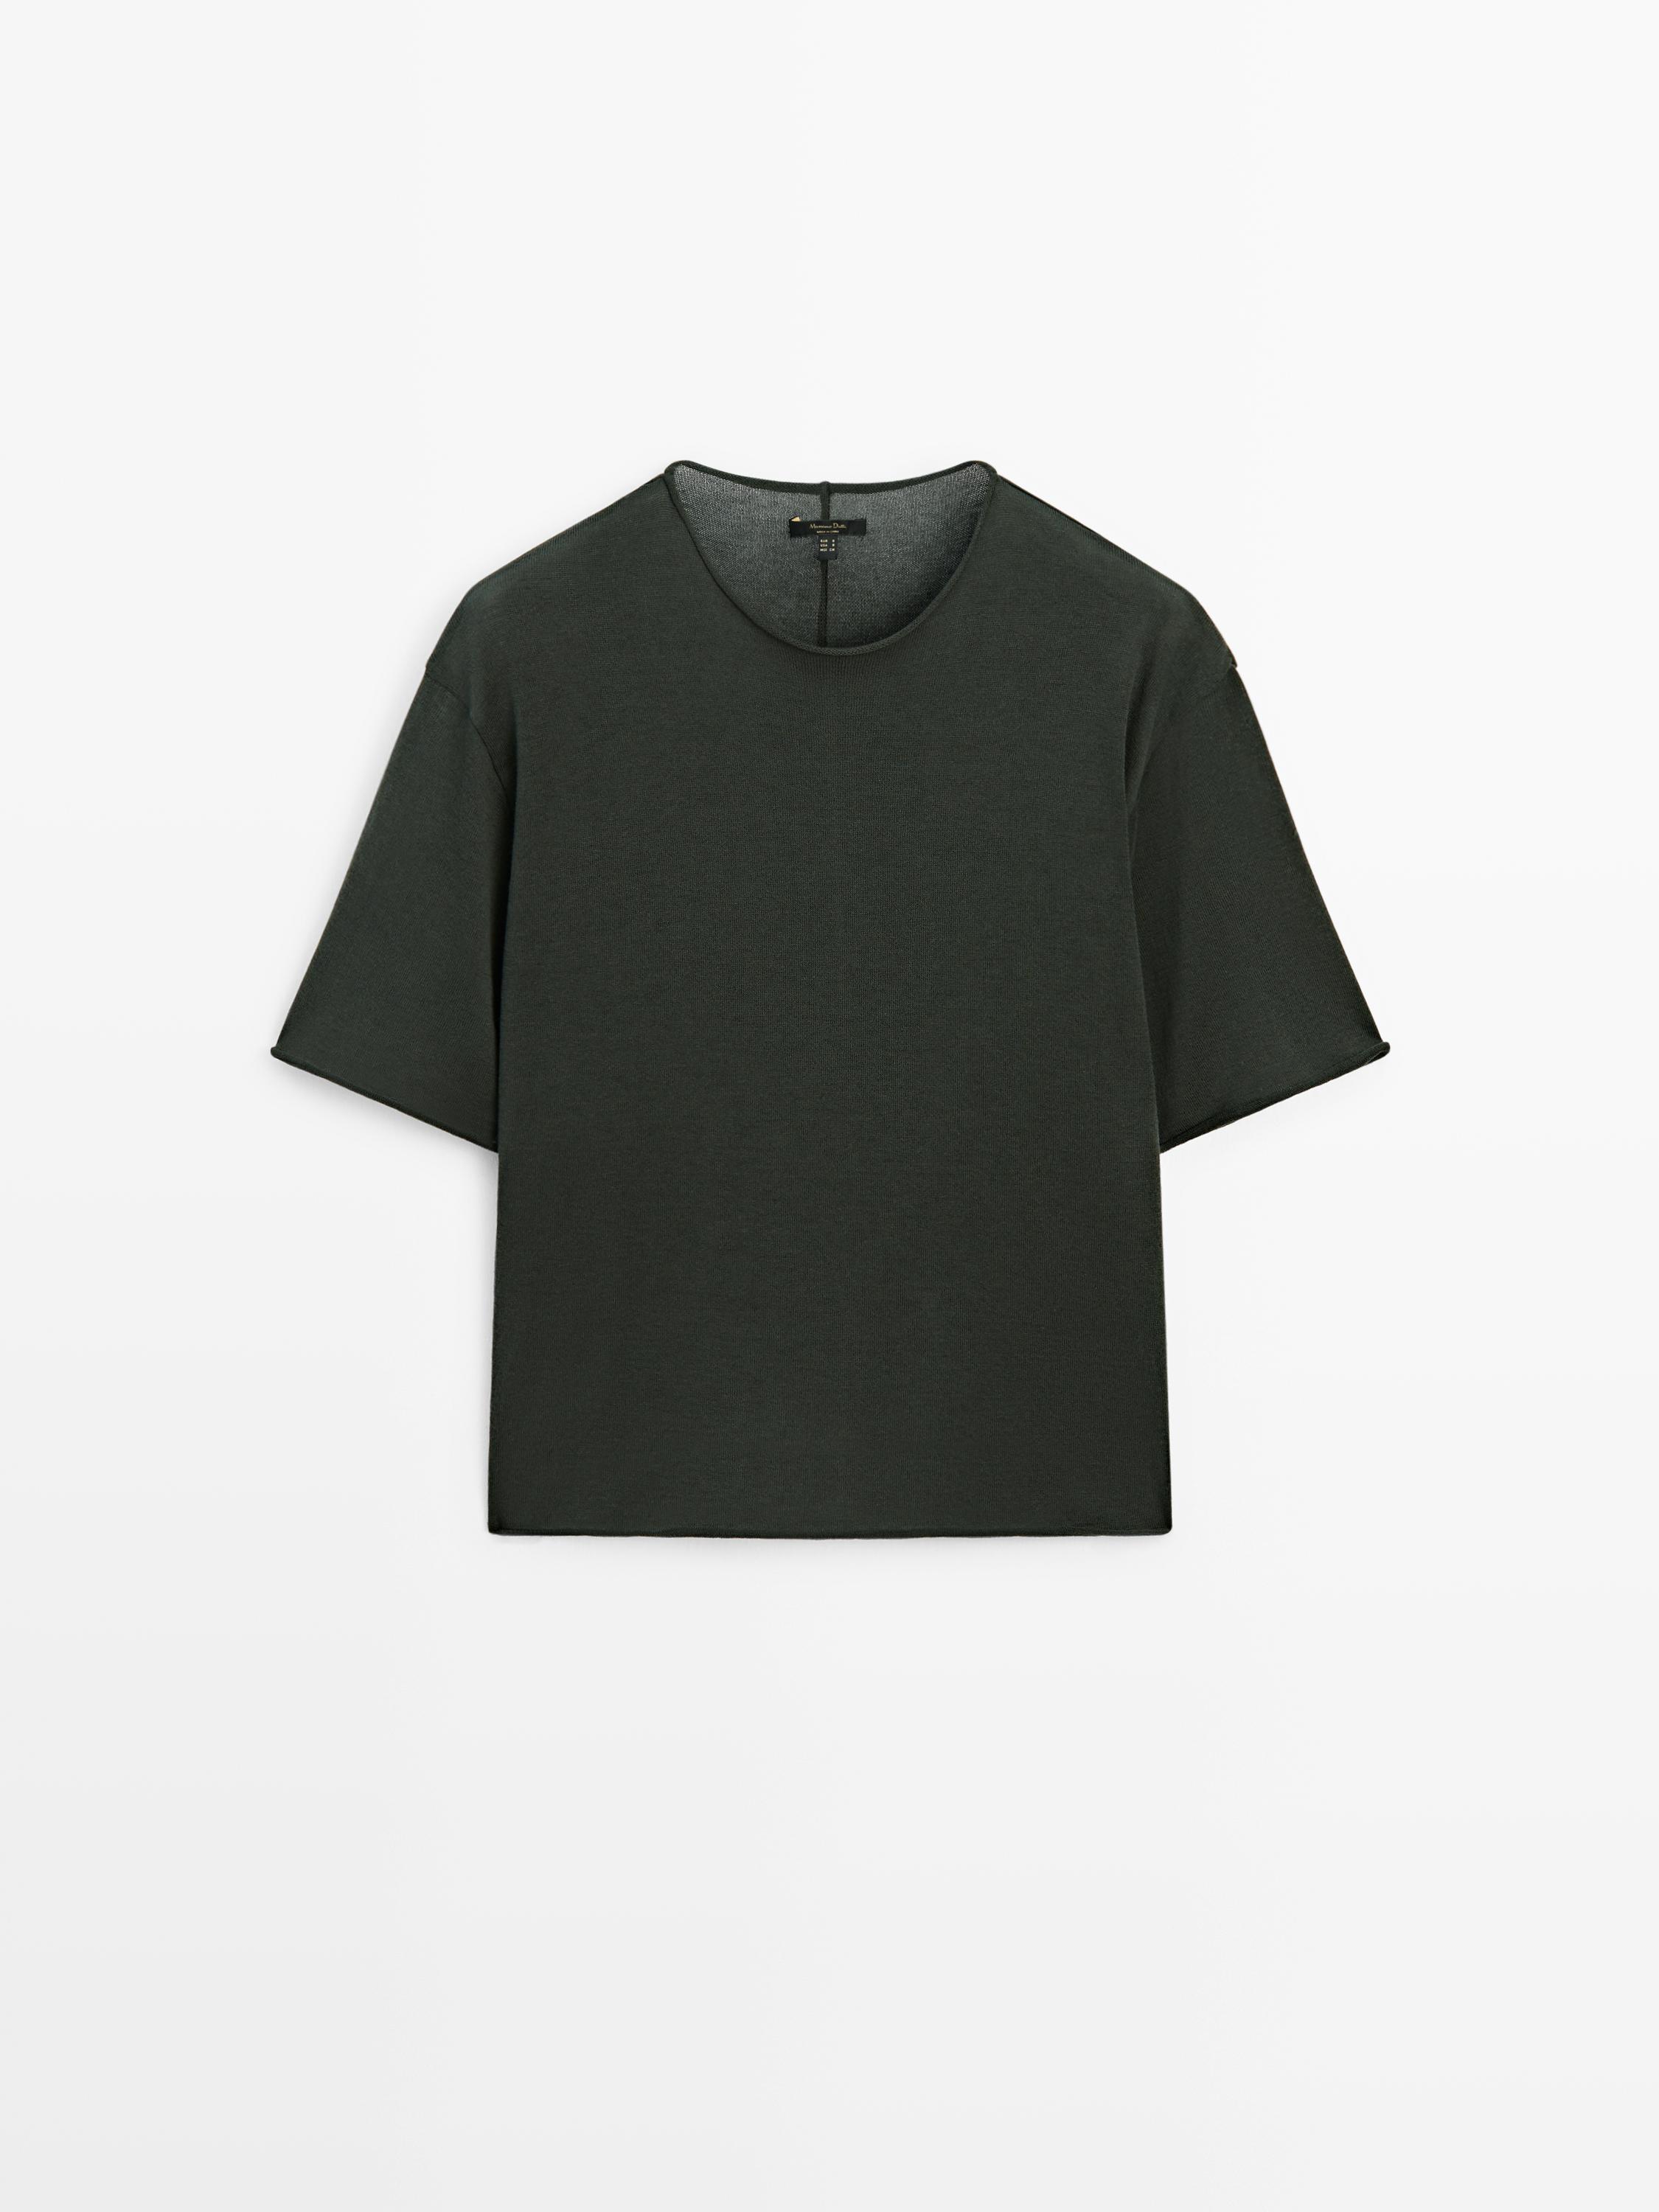 Cotton T-shirt with central seam detail - Red | ZARA United States